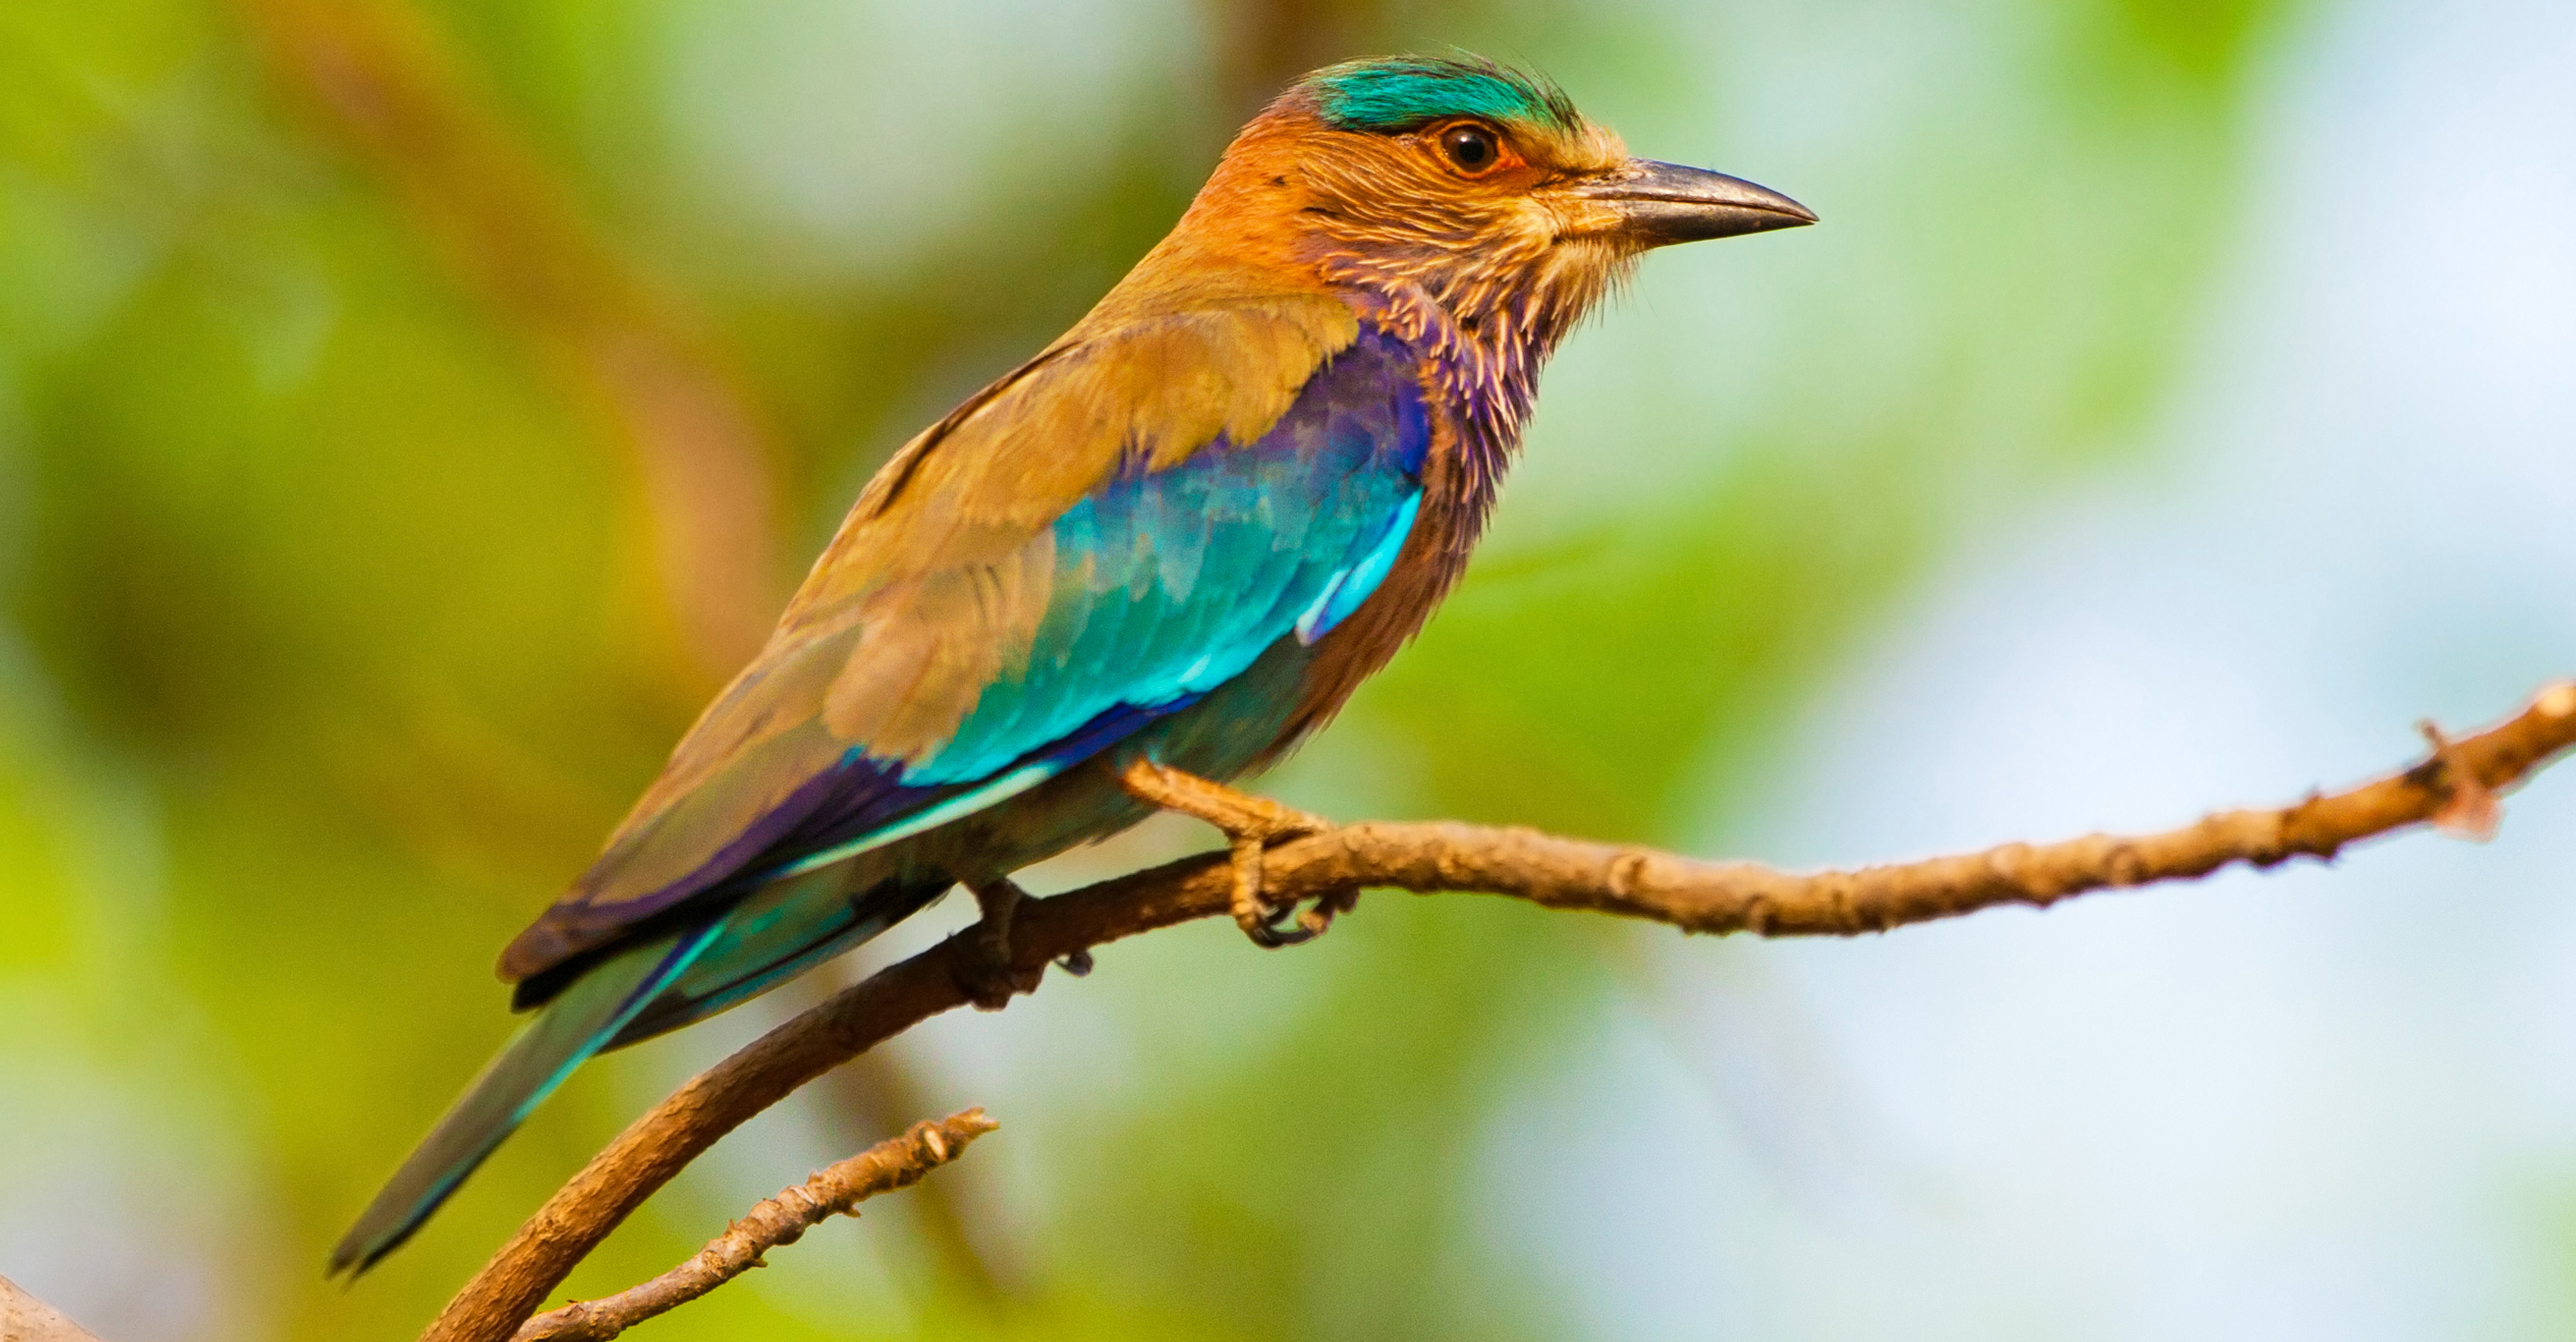 An Indian roller perches on a branch in the Bandhavgarh National Park, India